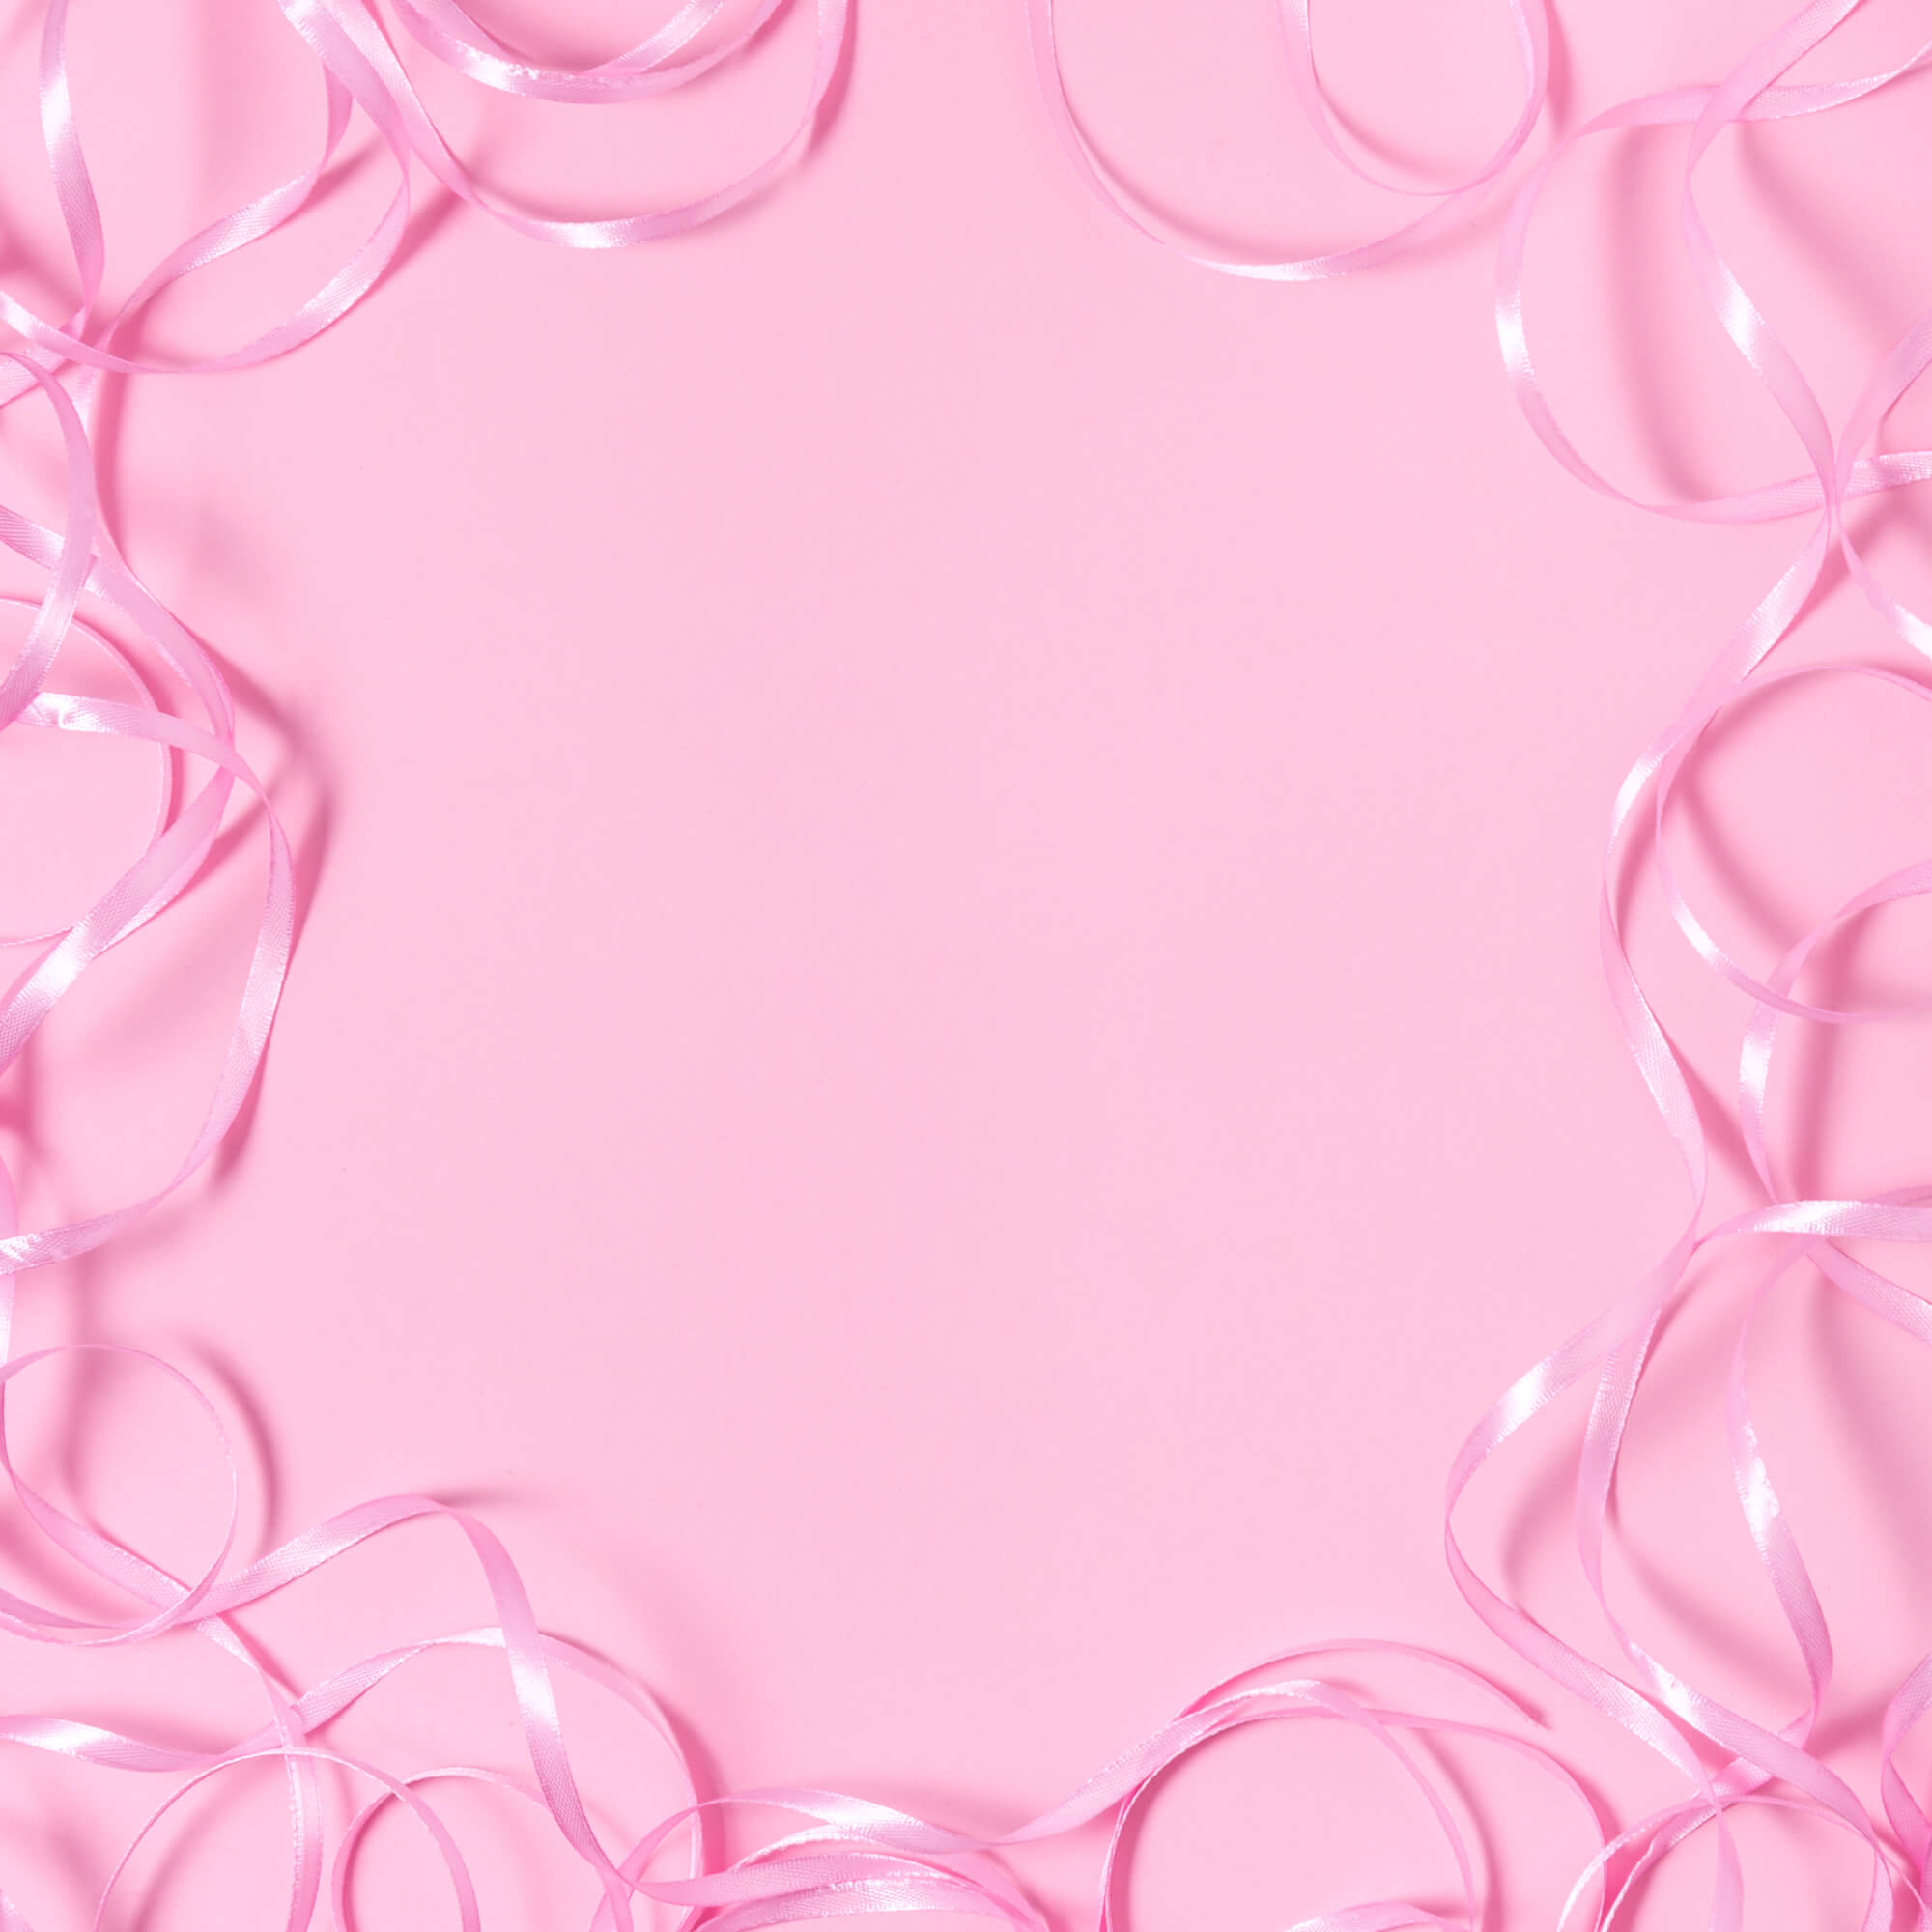 HD Pink Background Images: Free Download